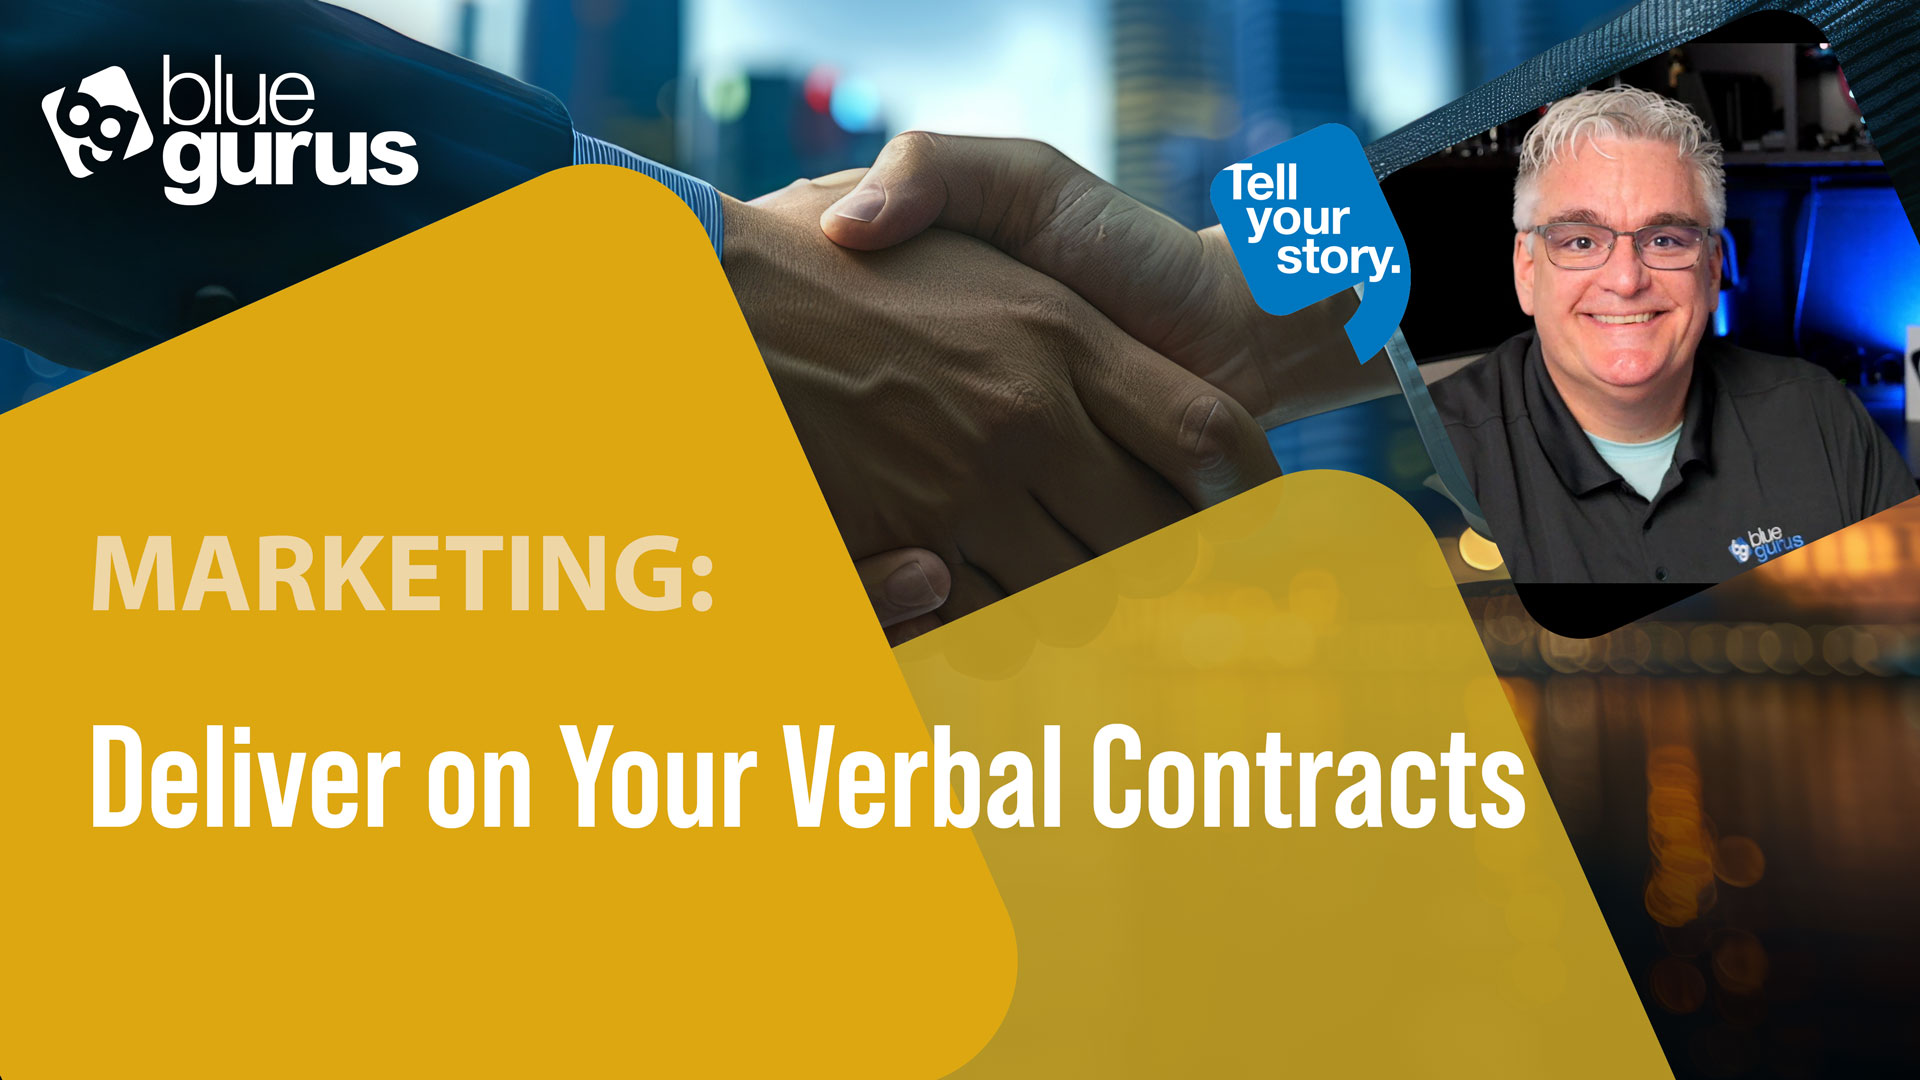 Deliver on Your Verbal Contracts